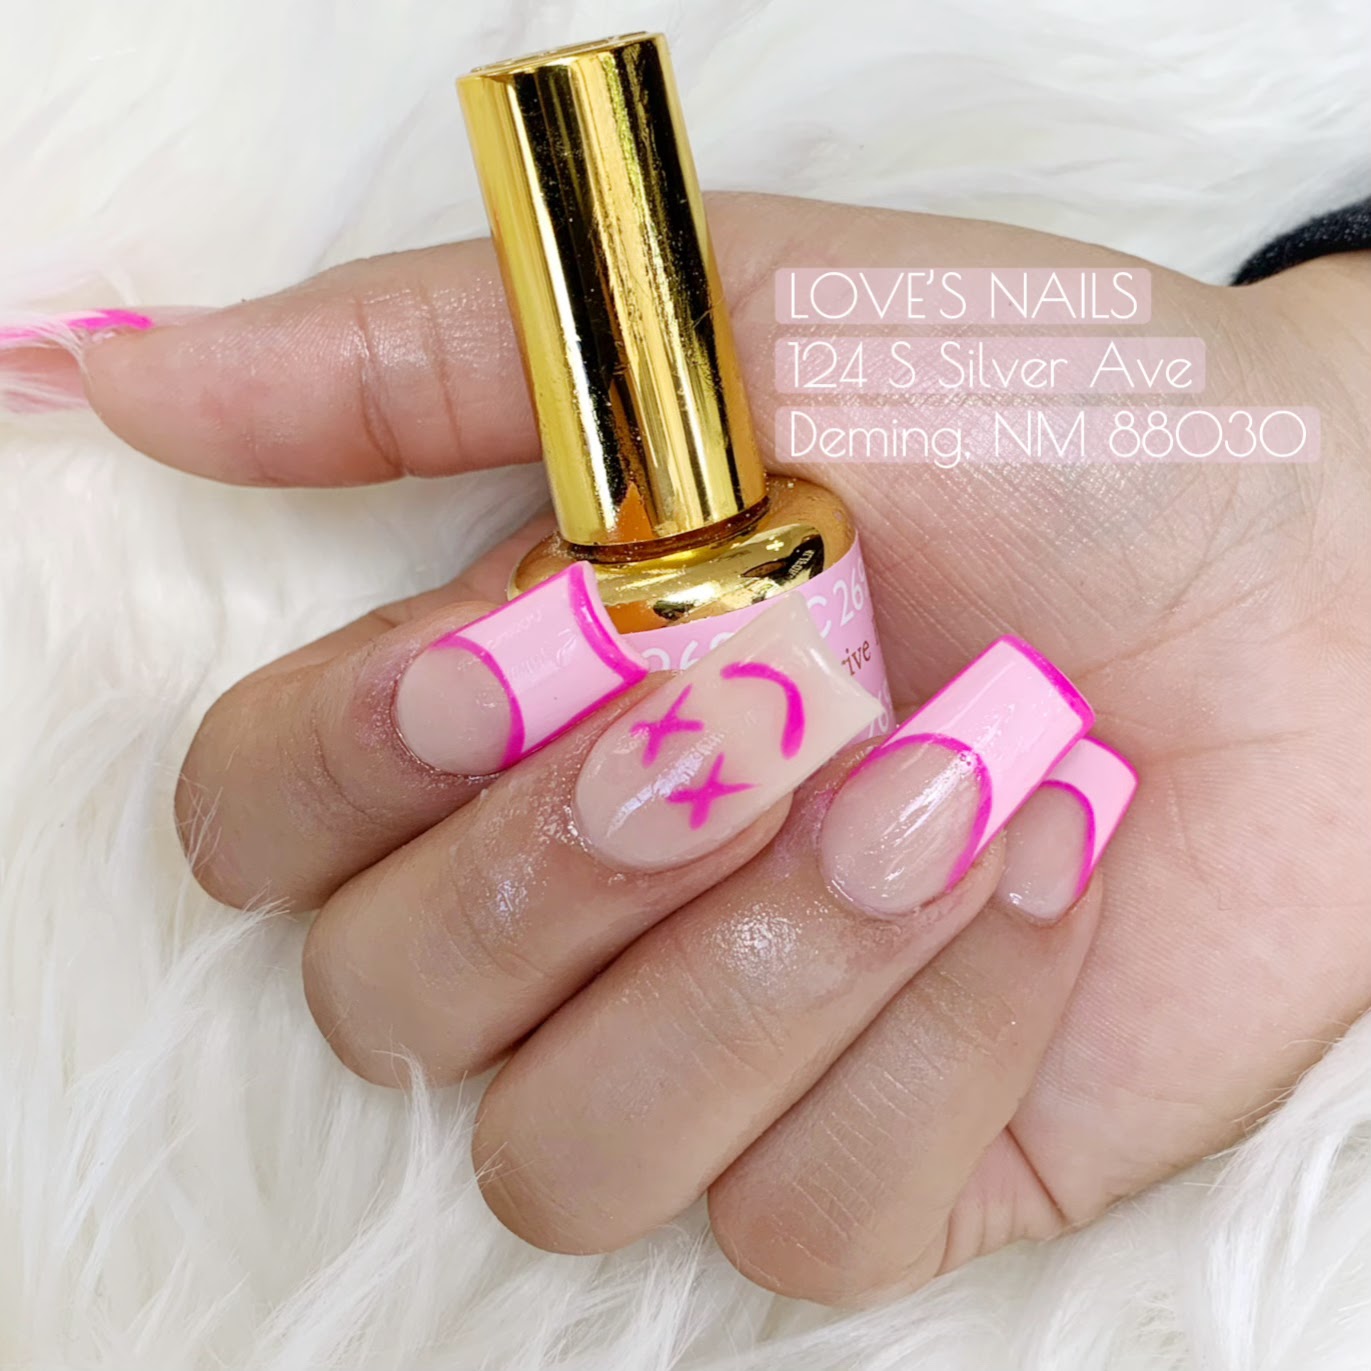 Love’s Nails 124 S Silver Ave, Deming New Mexico 88030